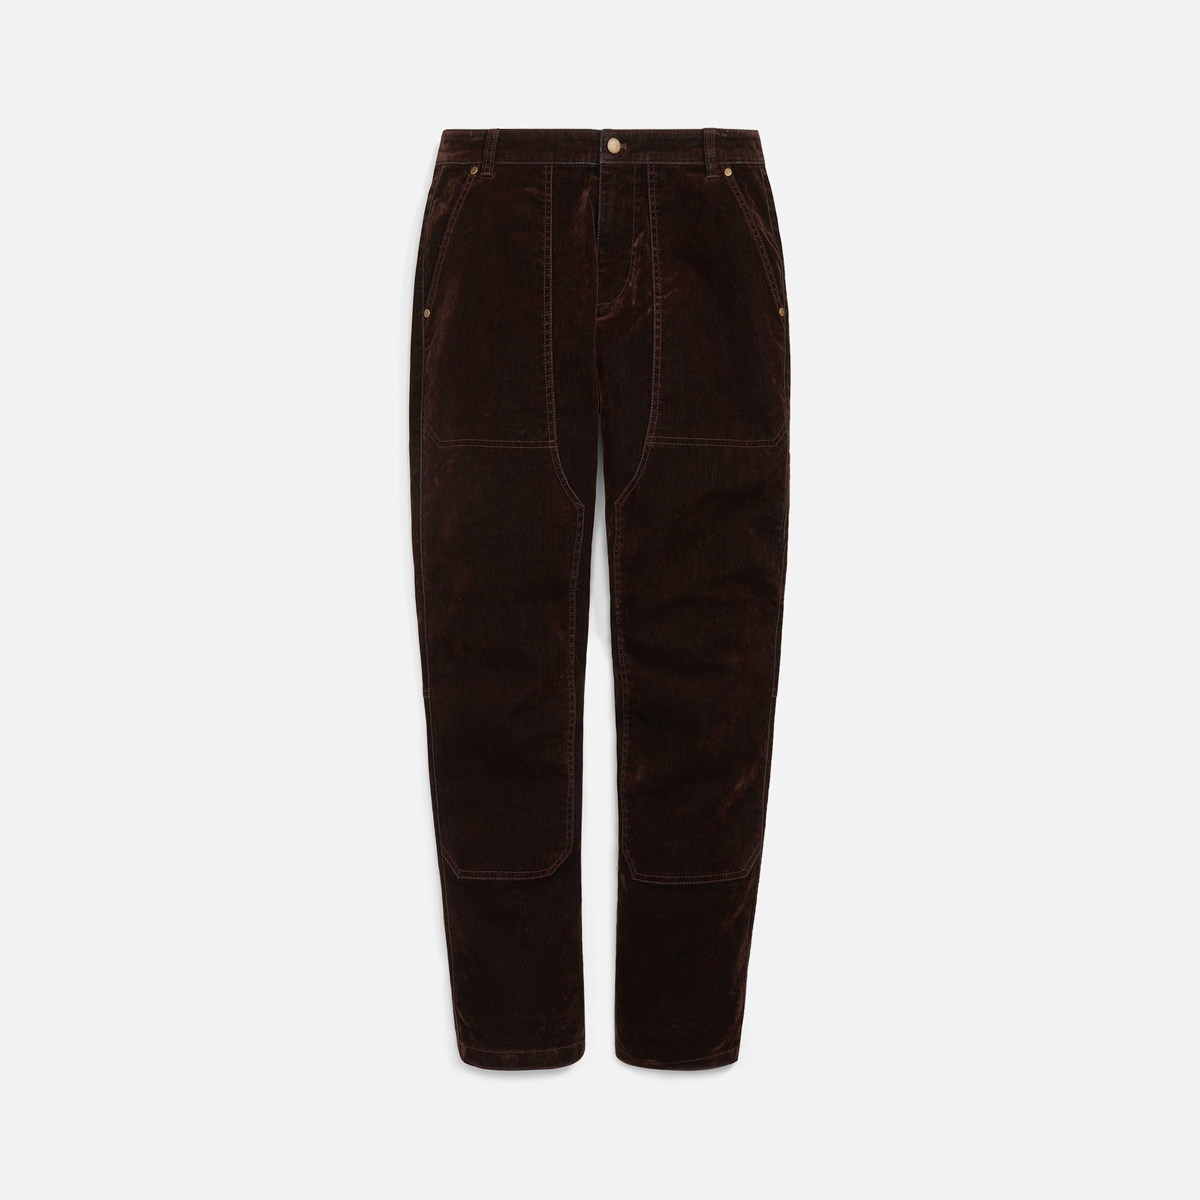 kith-fall-winter-2021-collection-bottoms-29